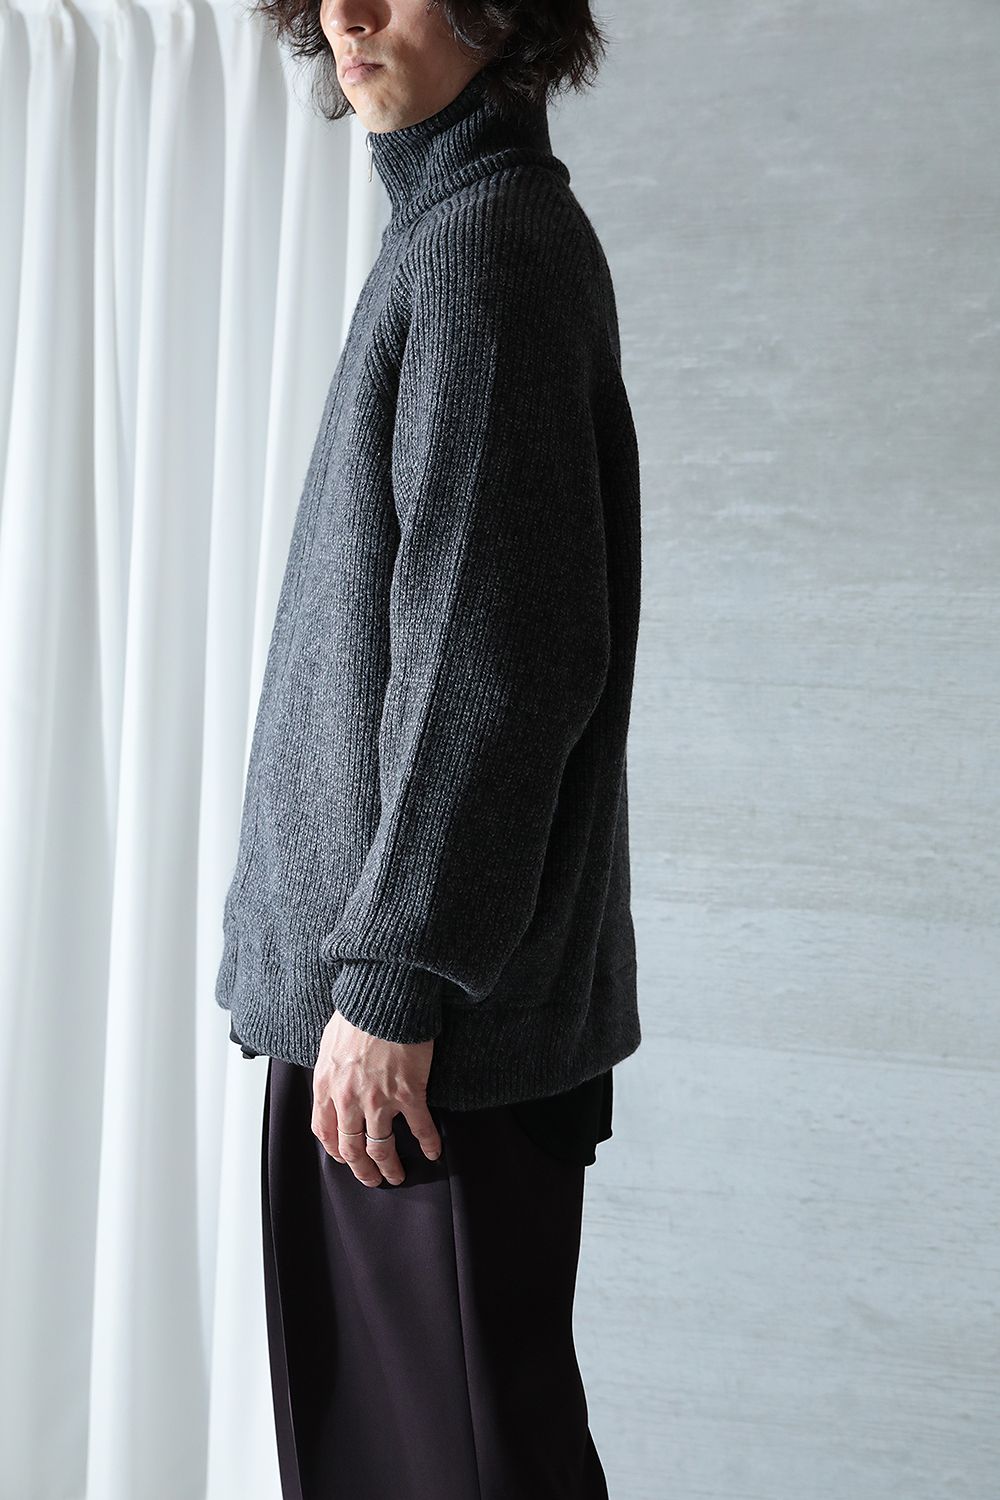 THE RERACS - 【23AW】RERACS DRIVERS KNIT(TOP GRAY/BULKY CASHMERE